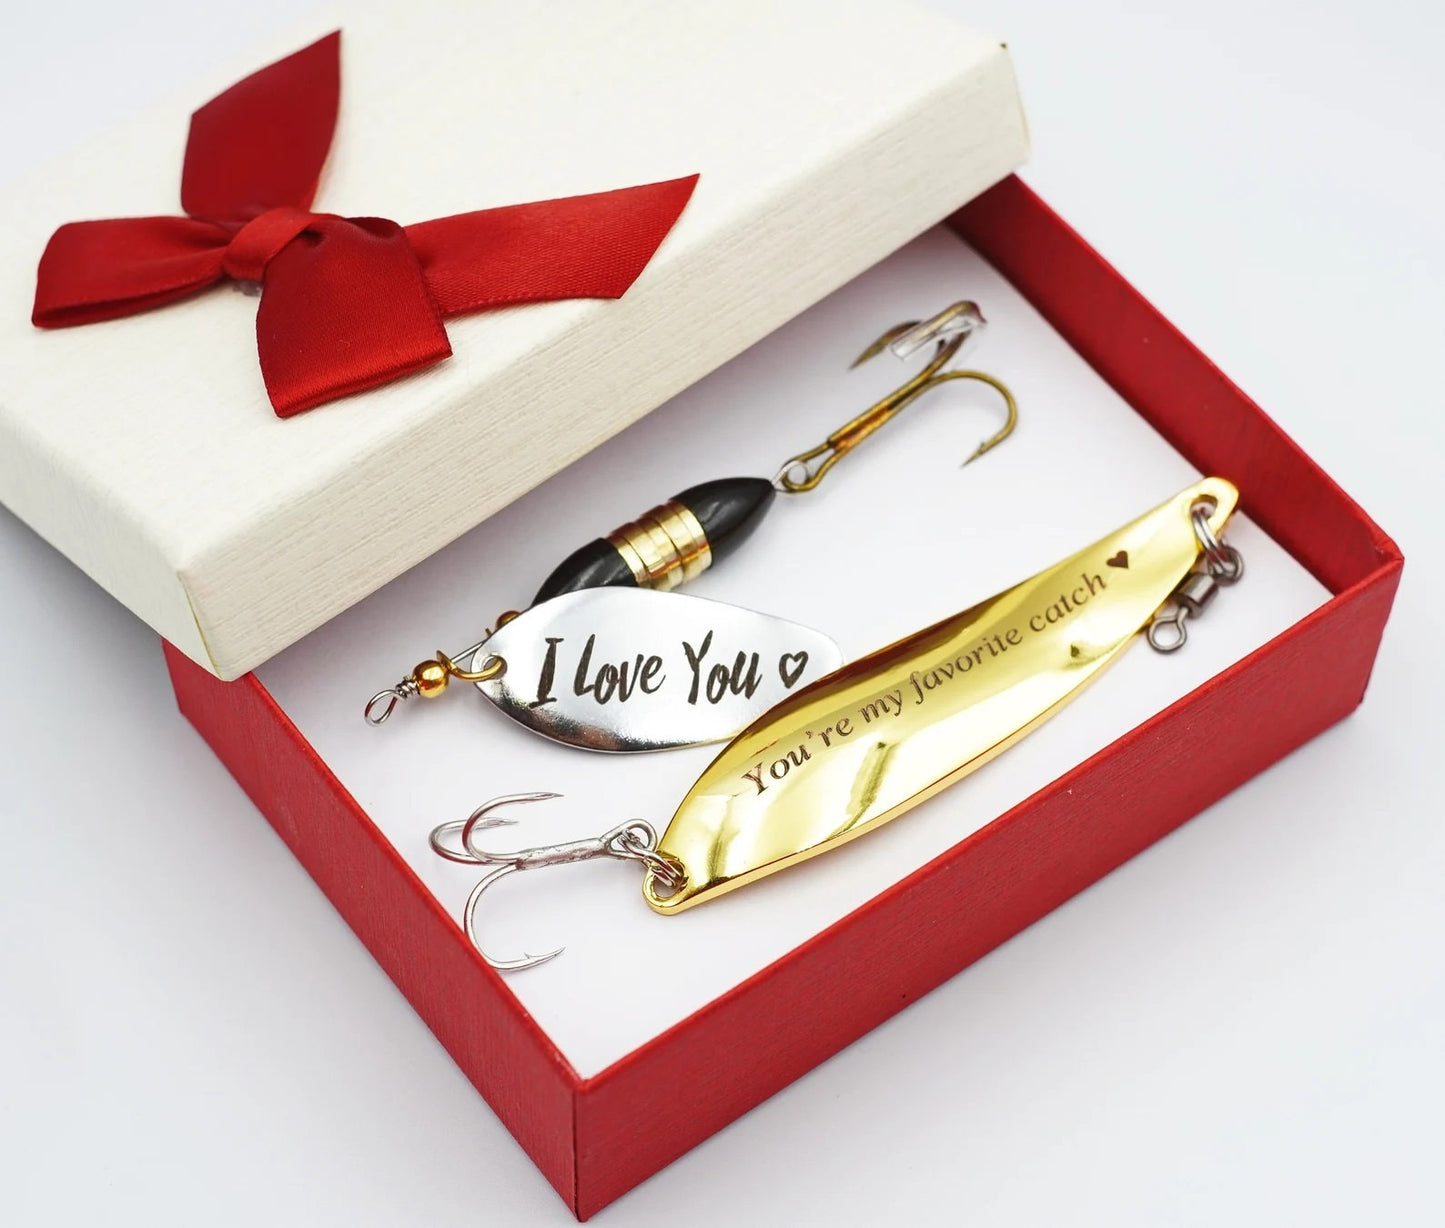 Fishing gift for man Personalized lure in gift box bait for fisherman